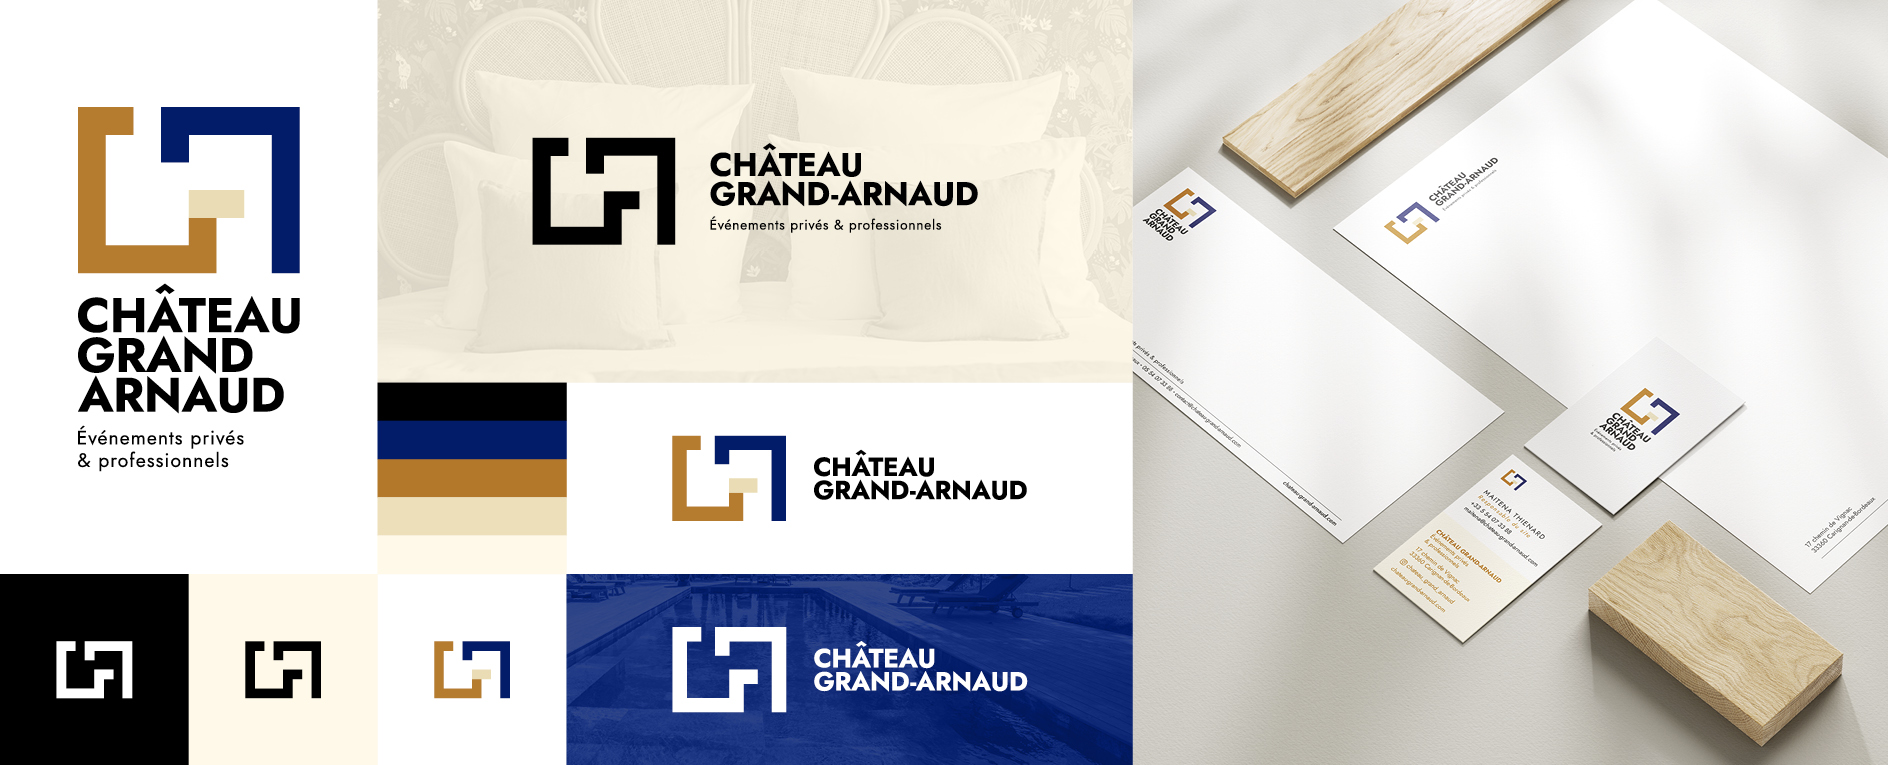 CHÂTEAU GRAND-ARNAUD - planche logos exemple